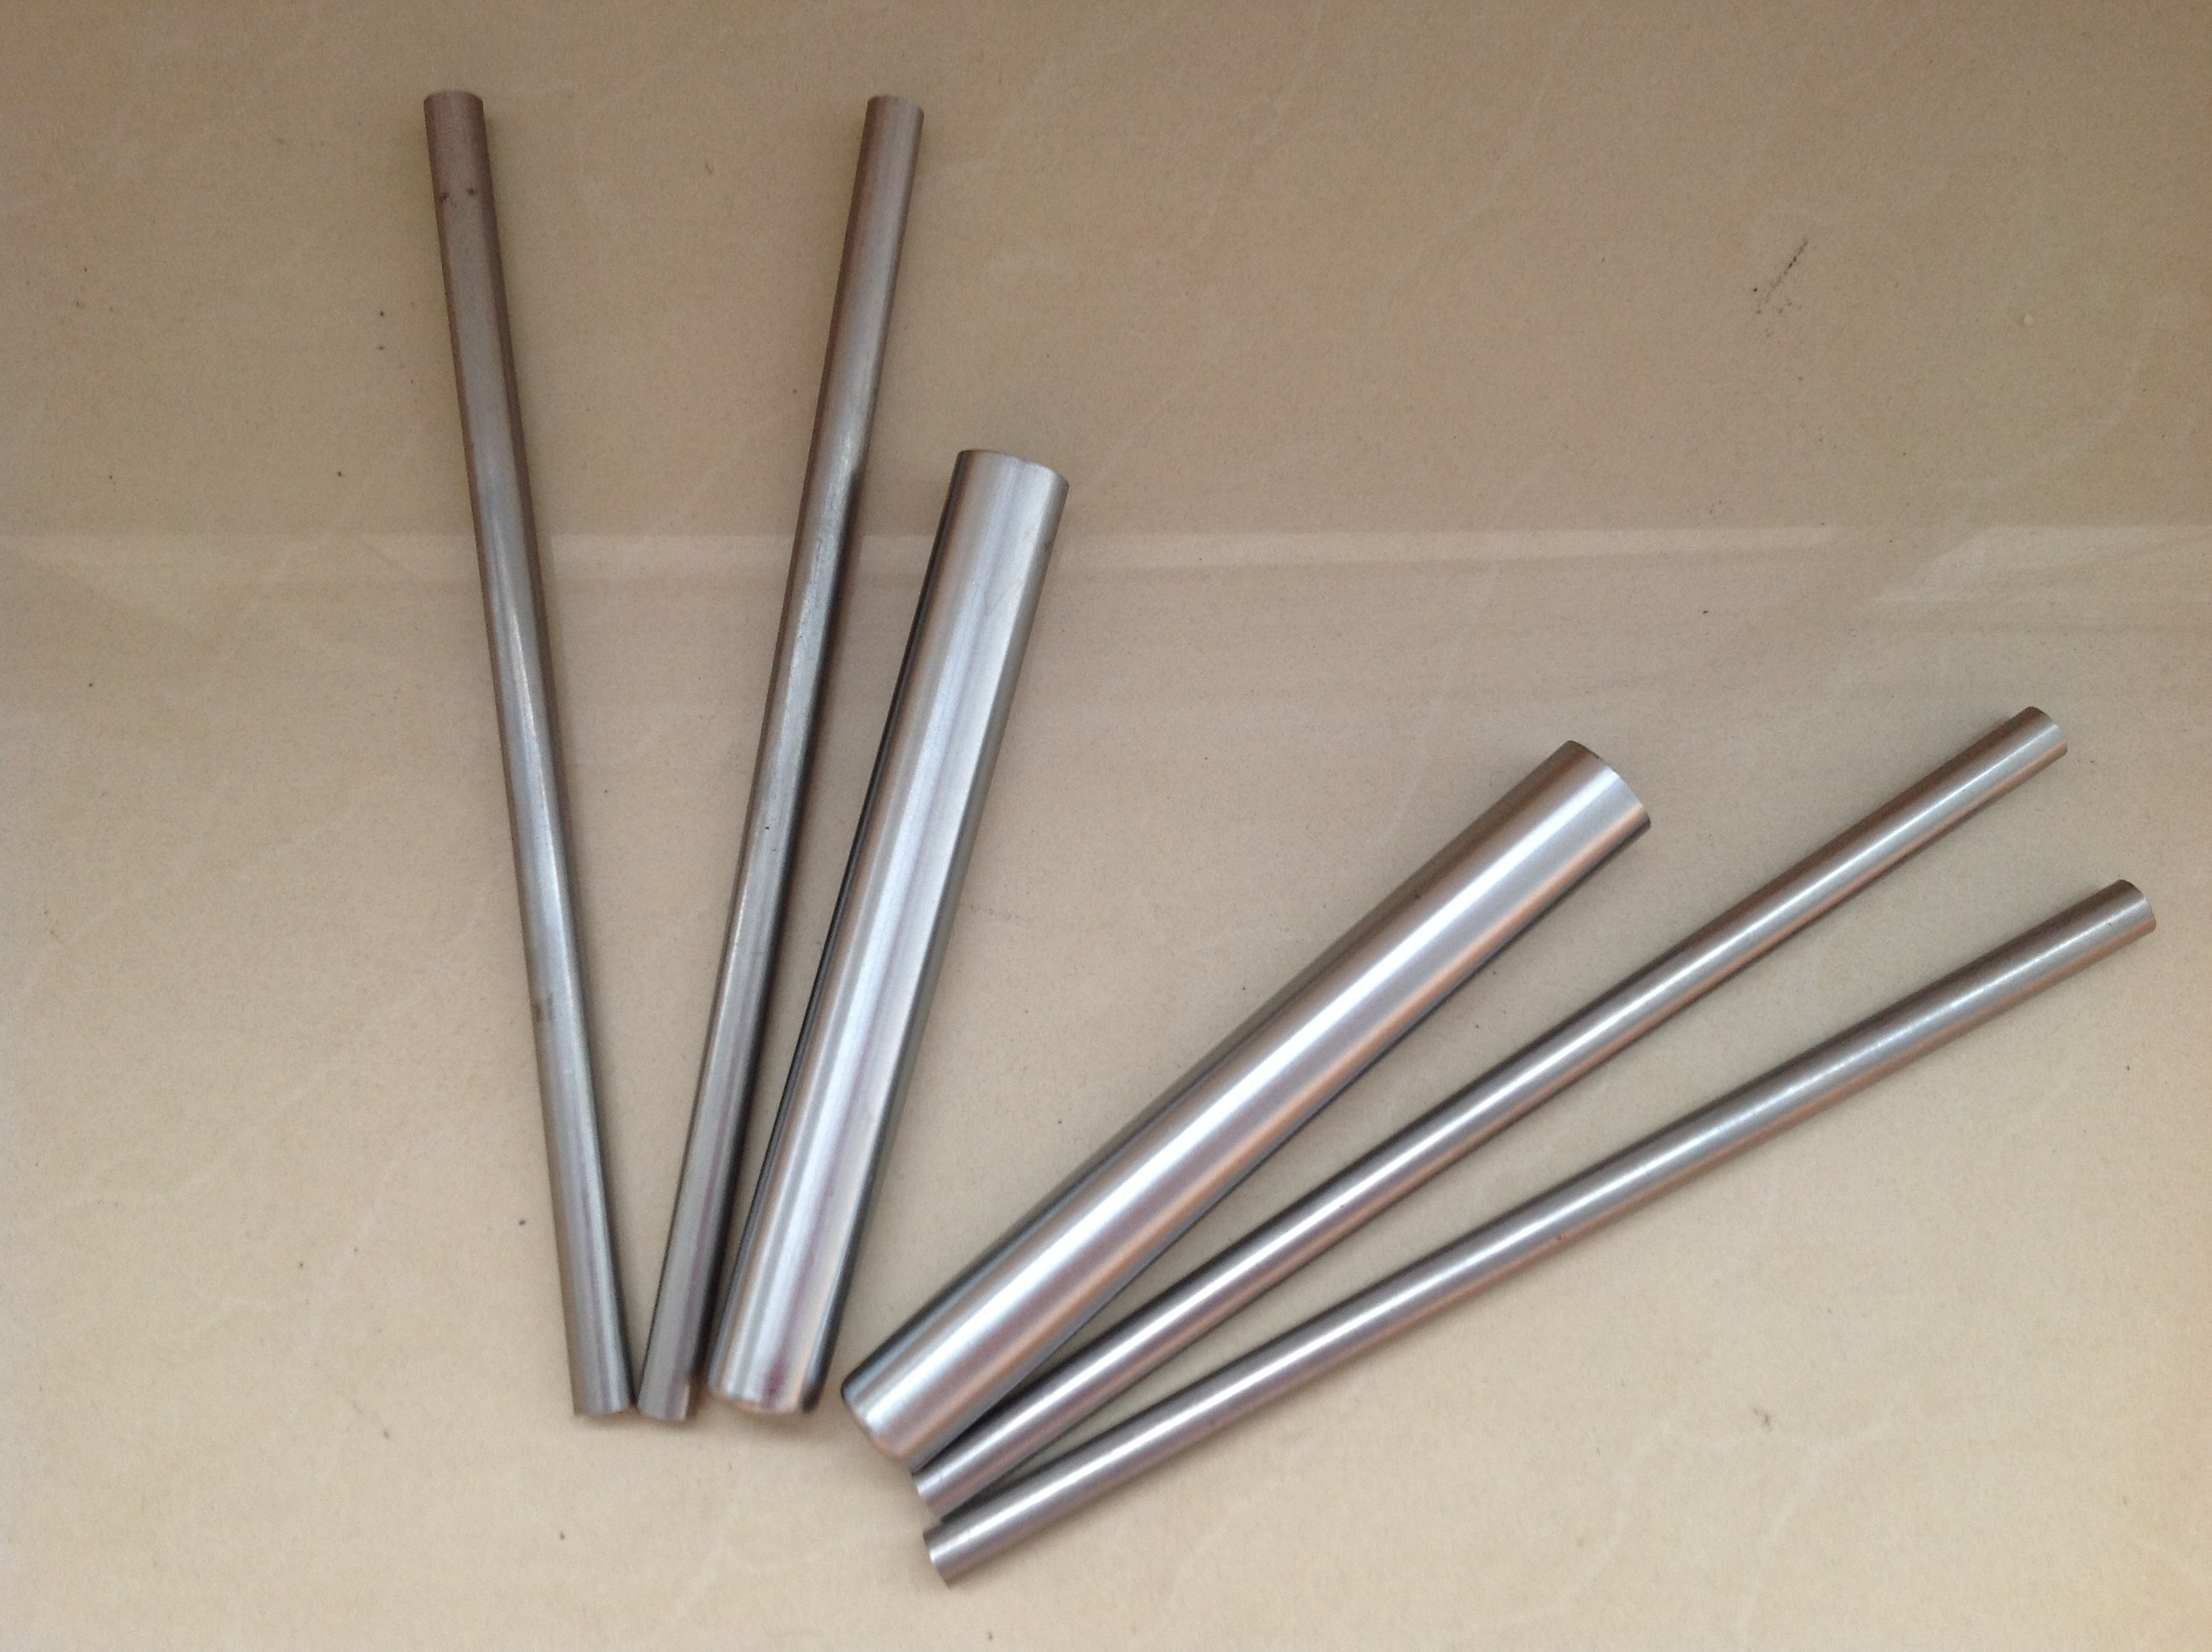  Cold Rolled Steel Tube